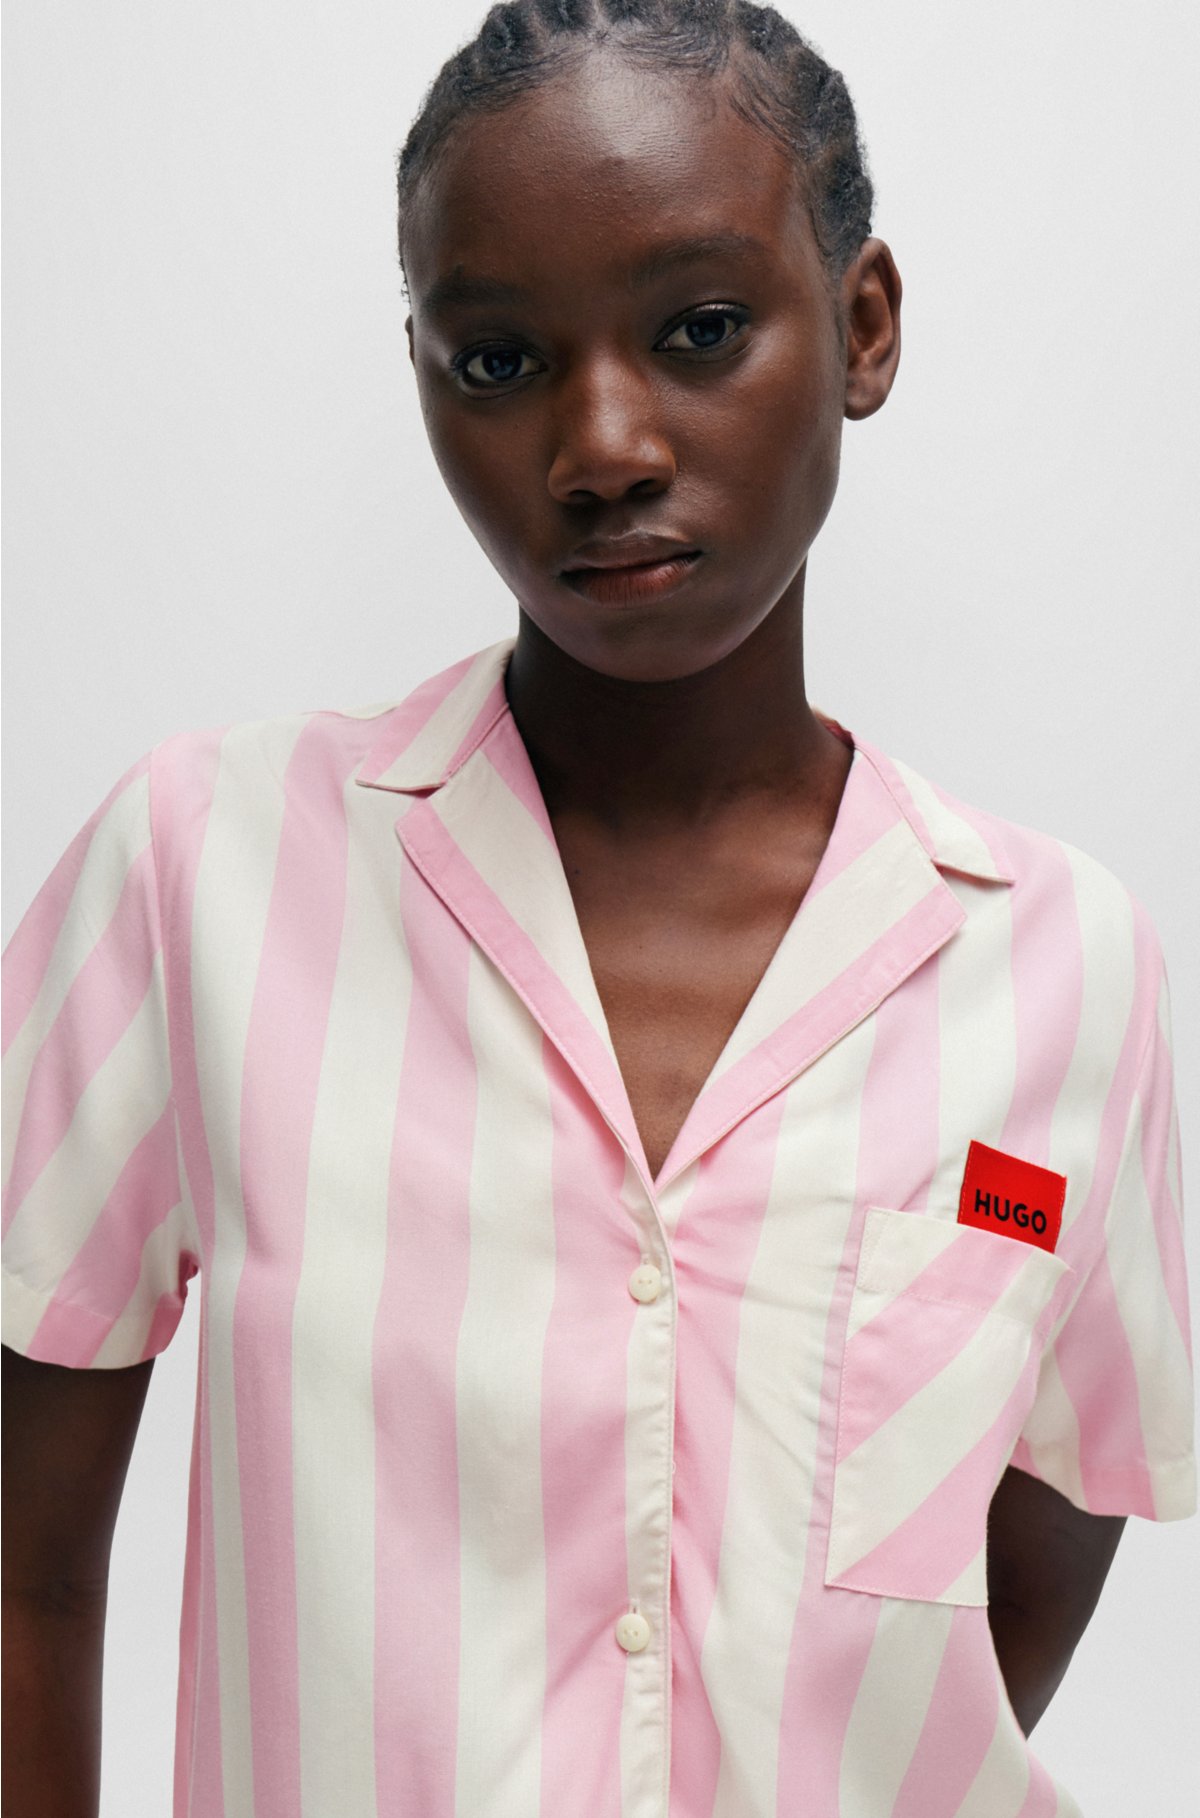 Patterned pyjama shirt with red logo label, Pink